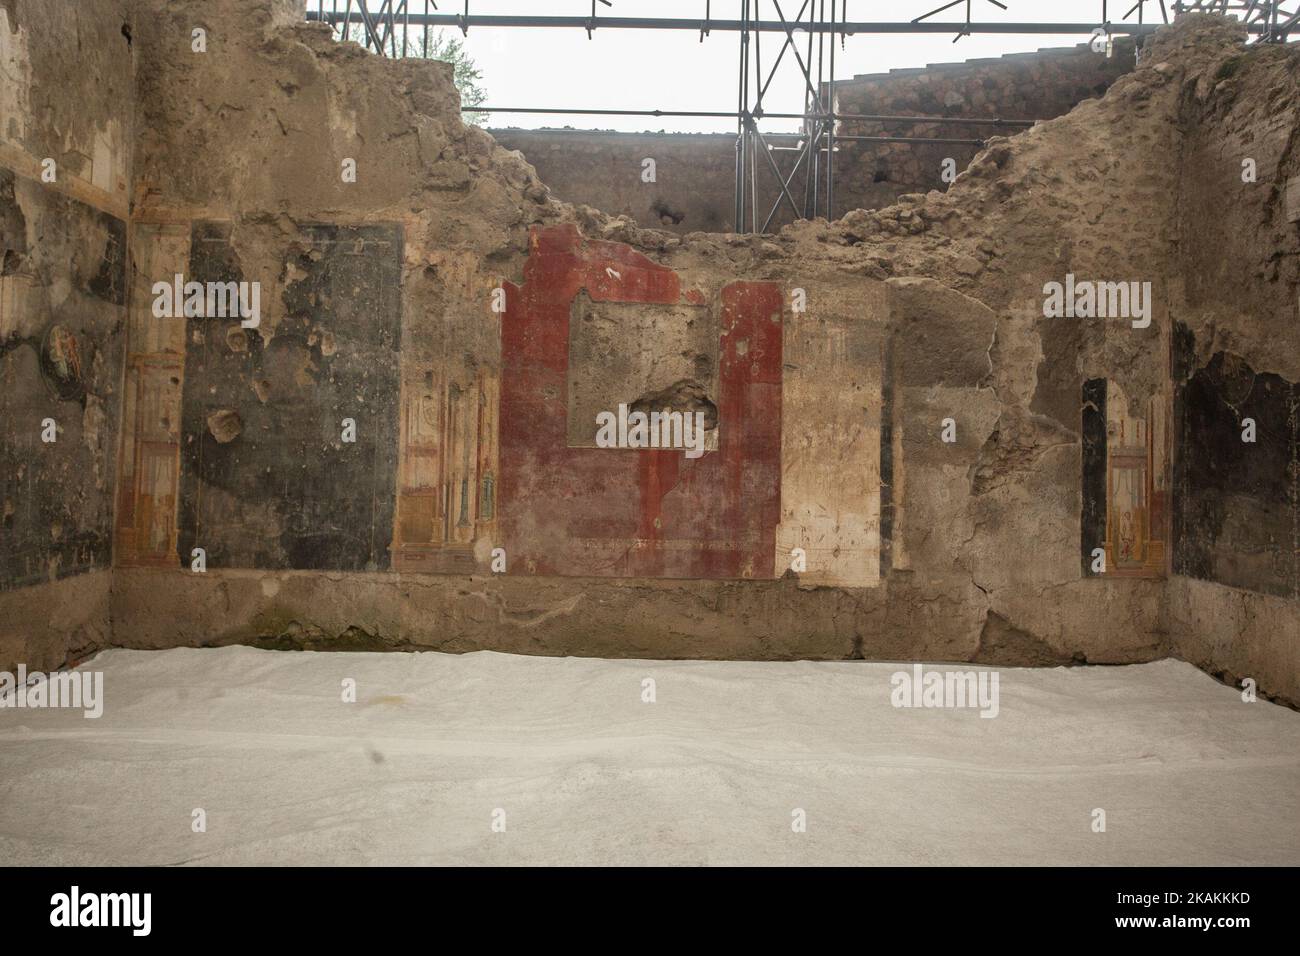 A fresco into the insula of the Chaste Lovers into the archeological ruins of Pompeii, along Via dell'Abbondanza, on February 8, 2017. The Domus of the Chaste Lovers will be open to the public in extraordinary session from Saturday 11 to Tuesday 14 of February on the occasion of St. Valentine's Day. After it will be closed for about four years to enable the complete restoration, enhancement and reconfiguration of the area.(Photo by Paolo Manzo/NurPhoto) *** Please Use Credit from Credit Field *** Stock Photo